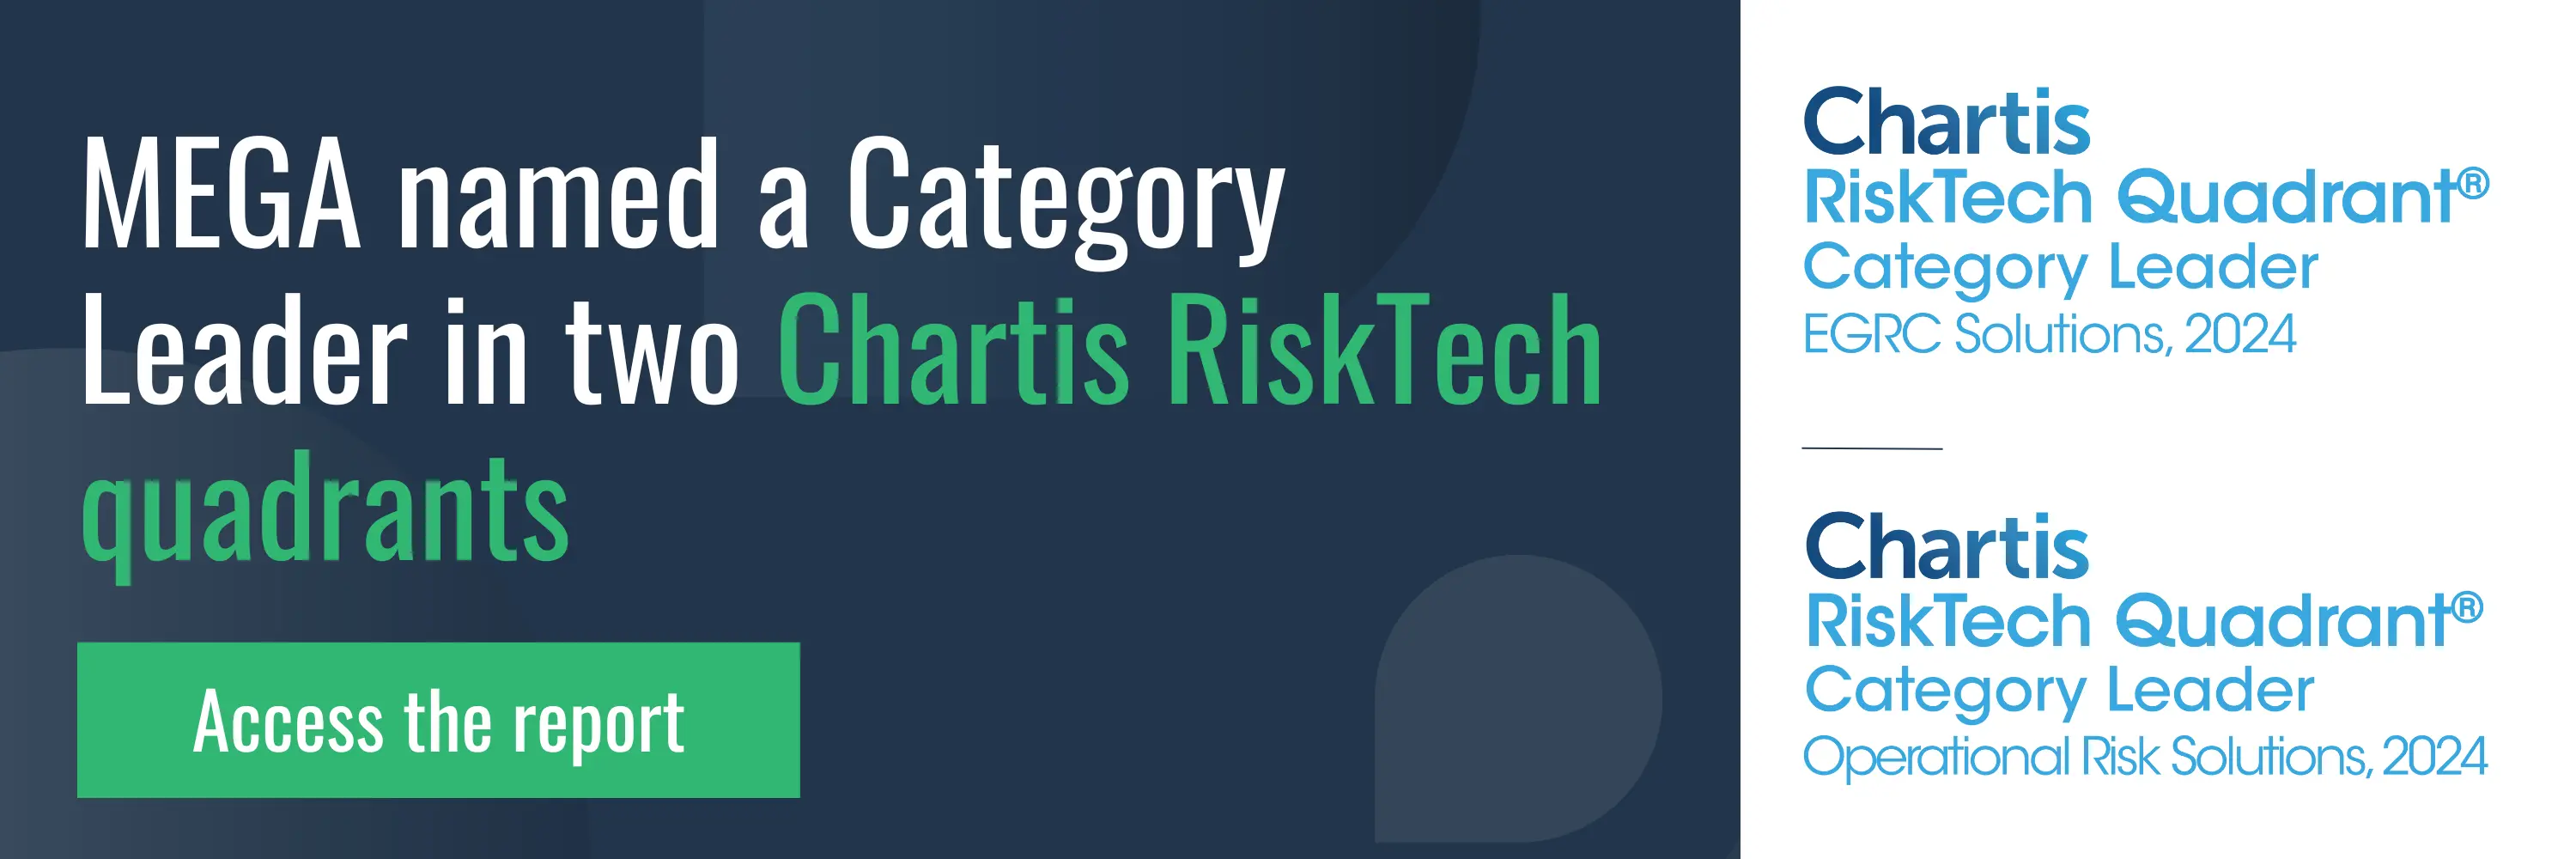 MEGA is a category leader in two chartis RiskTech Quadrants